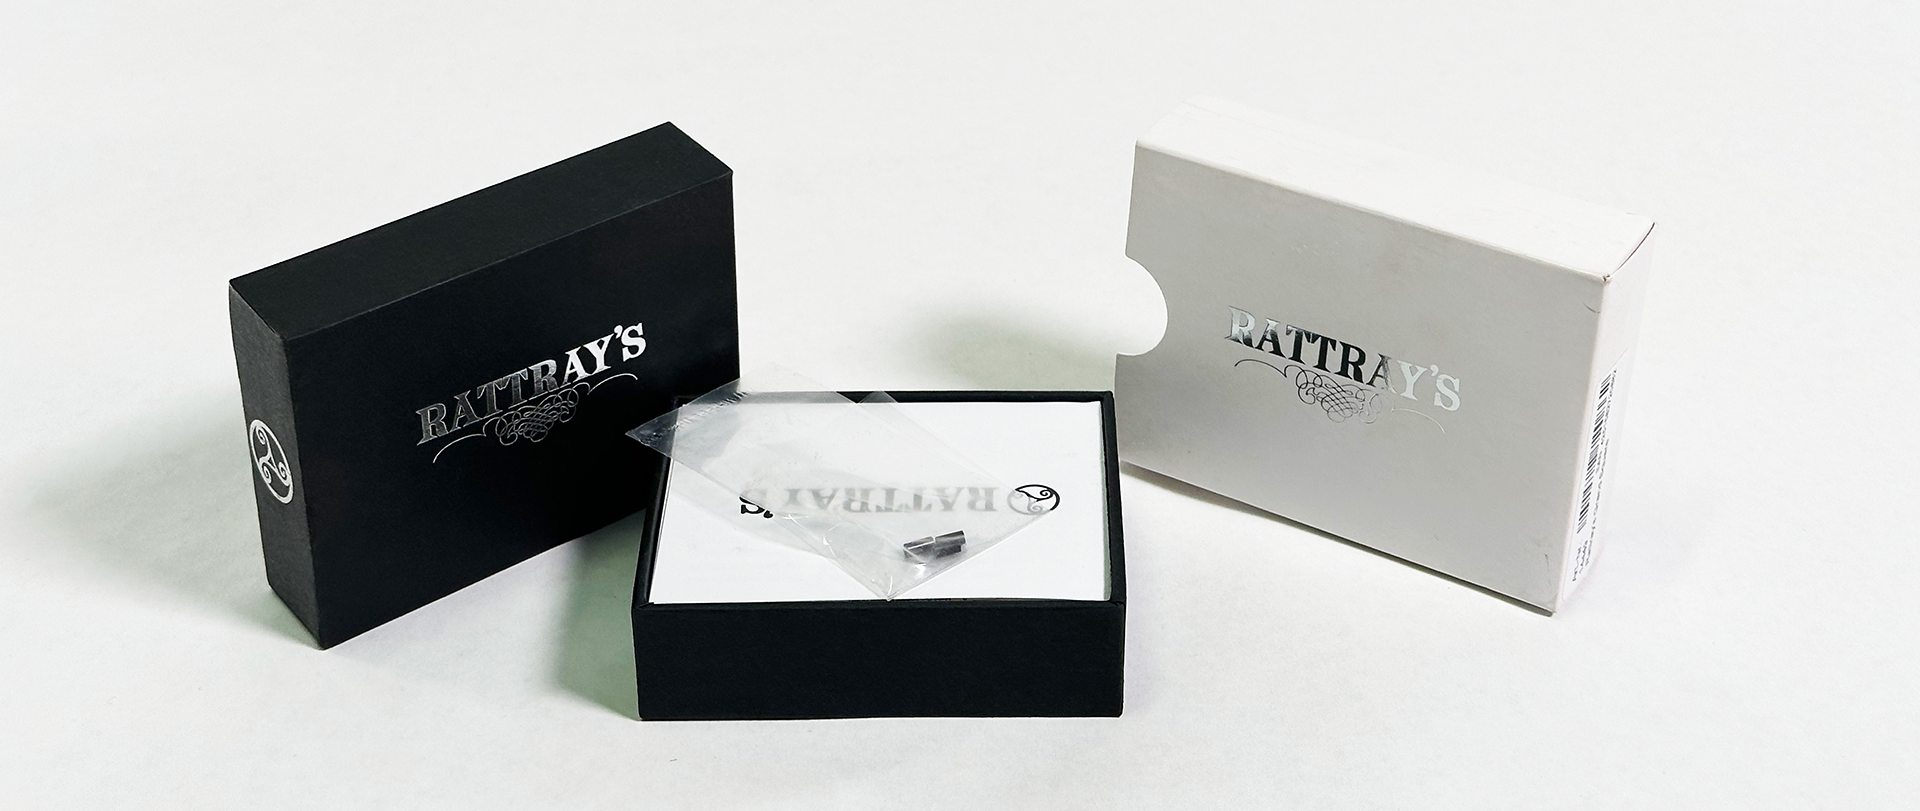 Rattray's Grand Squares Lighter Packaging